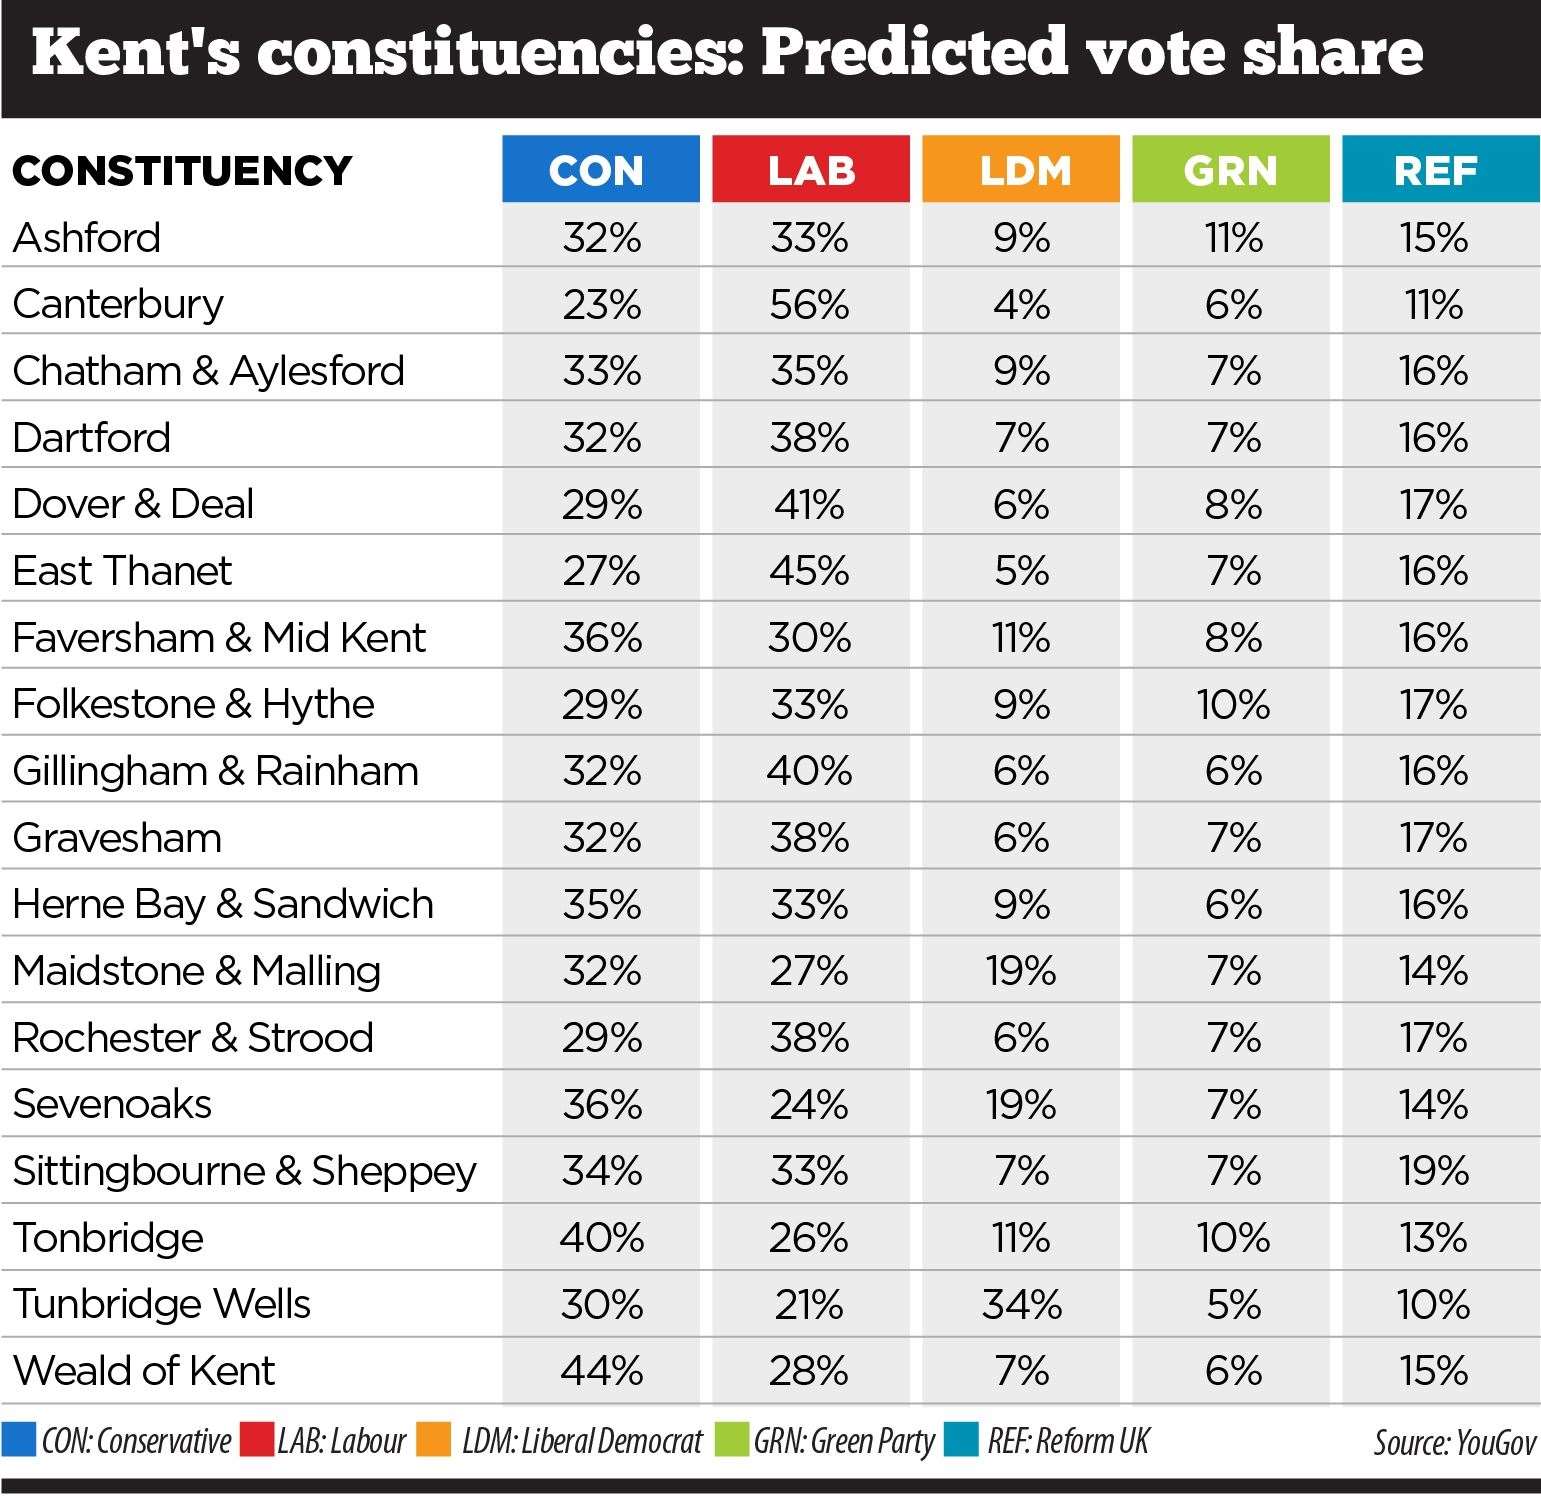 Ten of the contests in Kent have a predicted margin of victory of 6% or less, according to YouGov